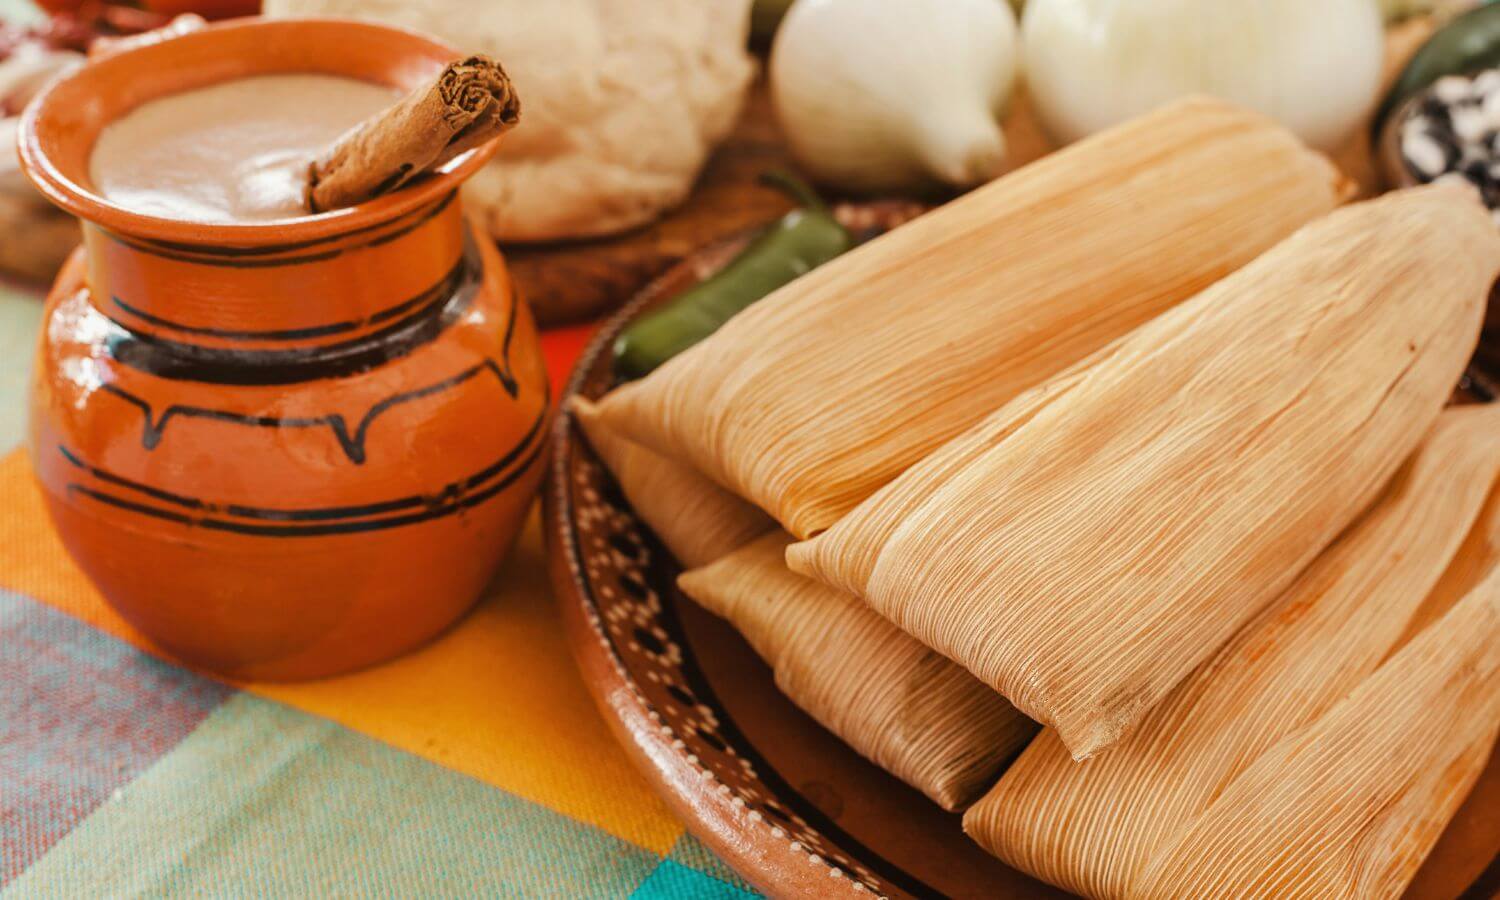 Mexican Hot Chocolate and Tamales